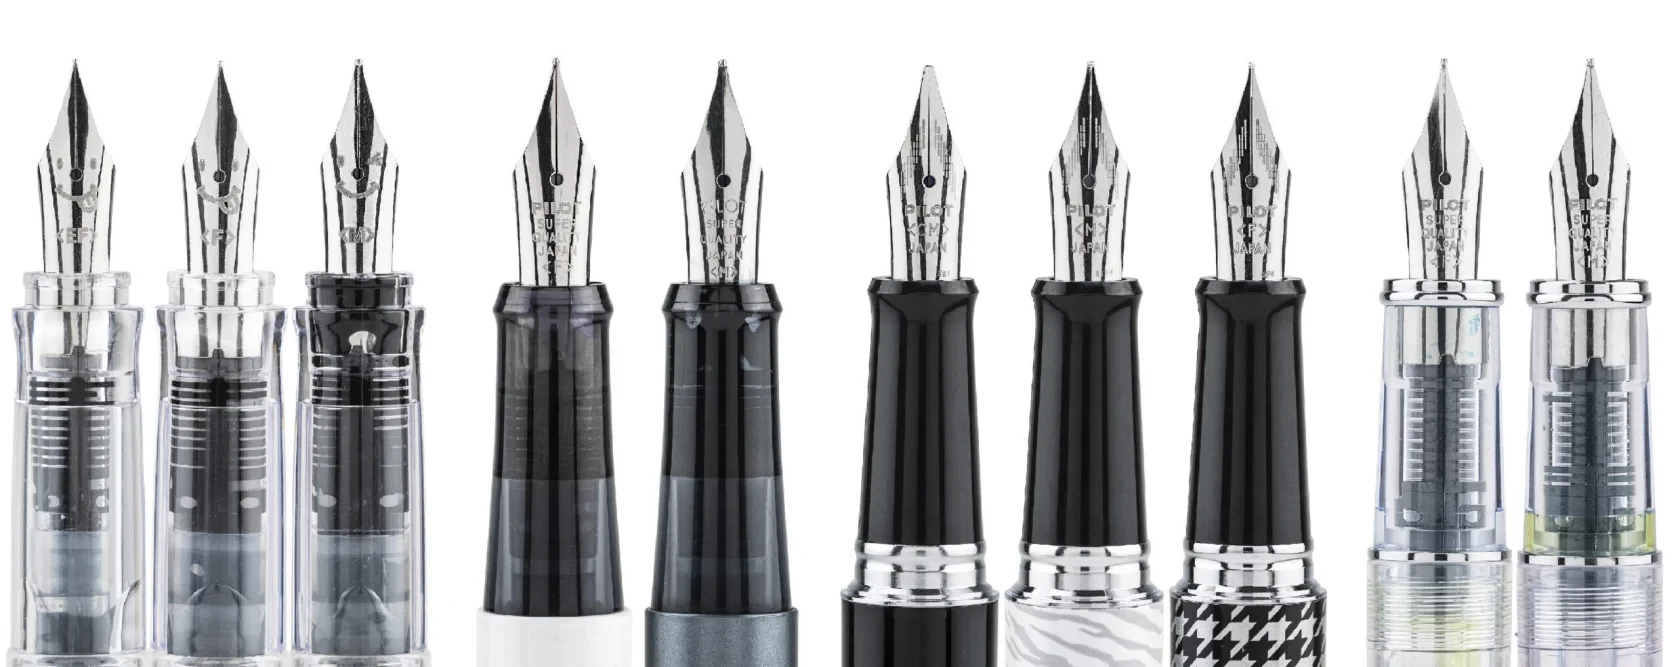 A close-up of the various fountain pen nib options by PILOT pen.